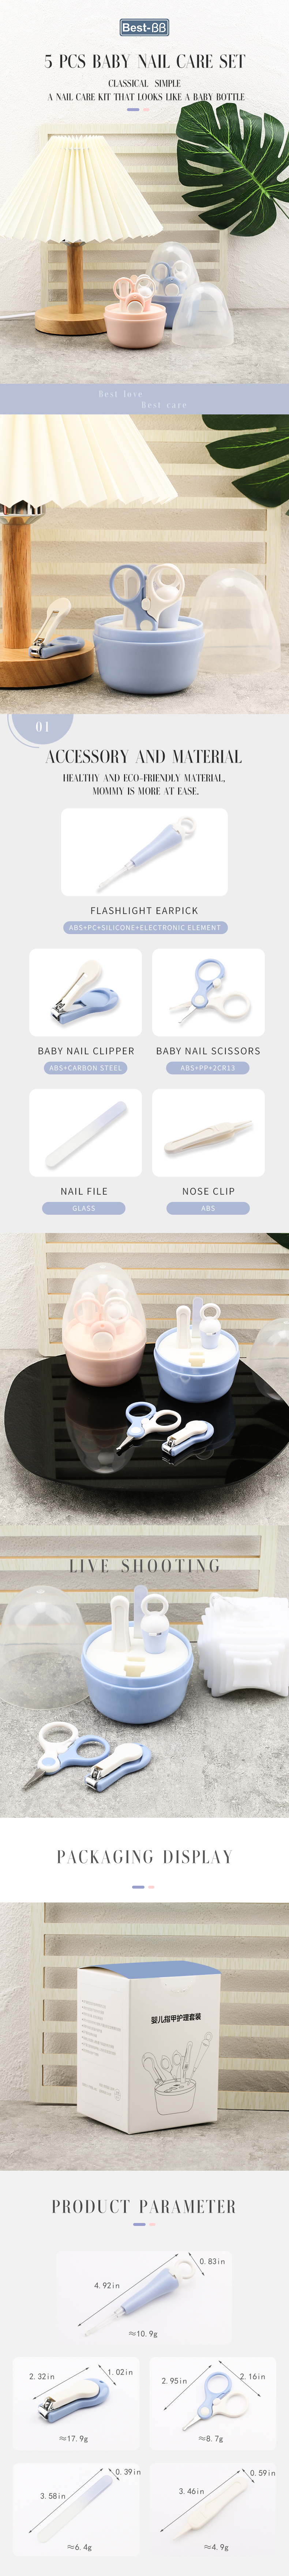 5-in-1 Baby Nail Care Set